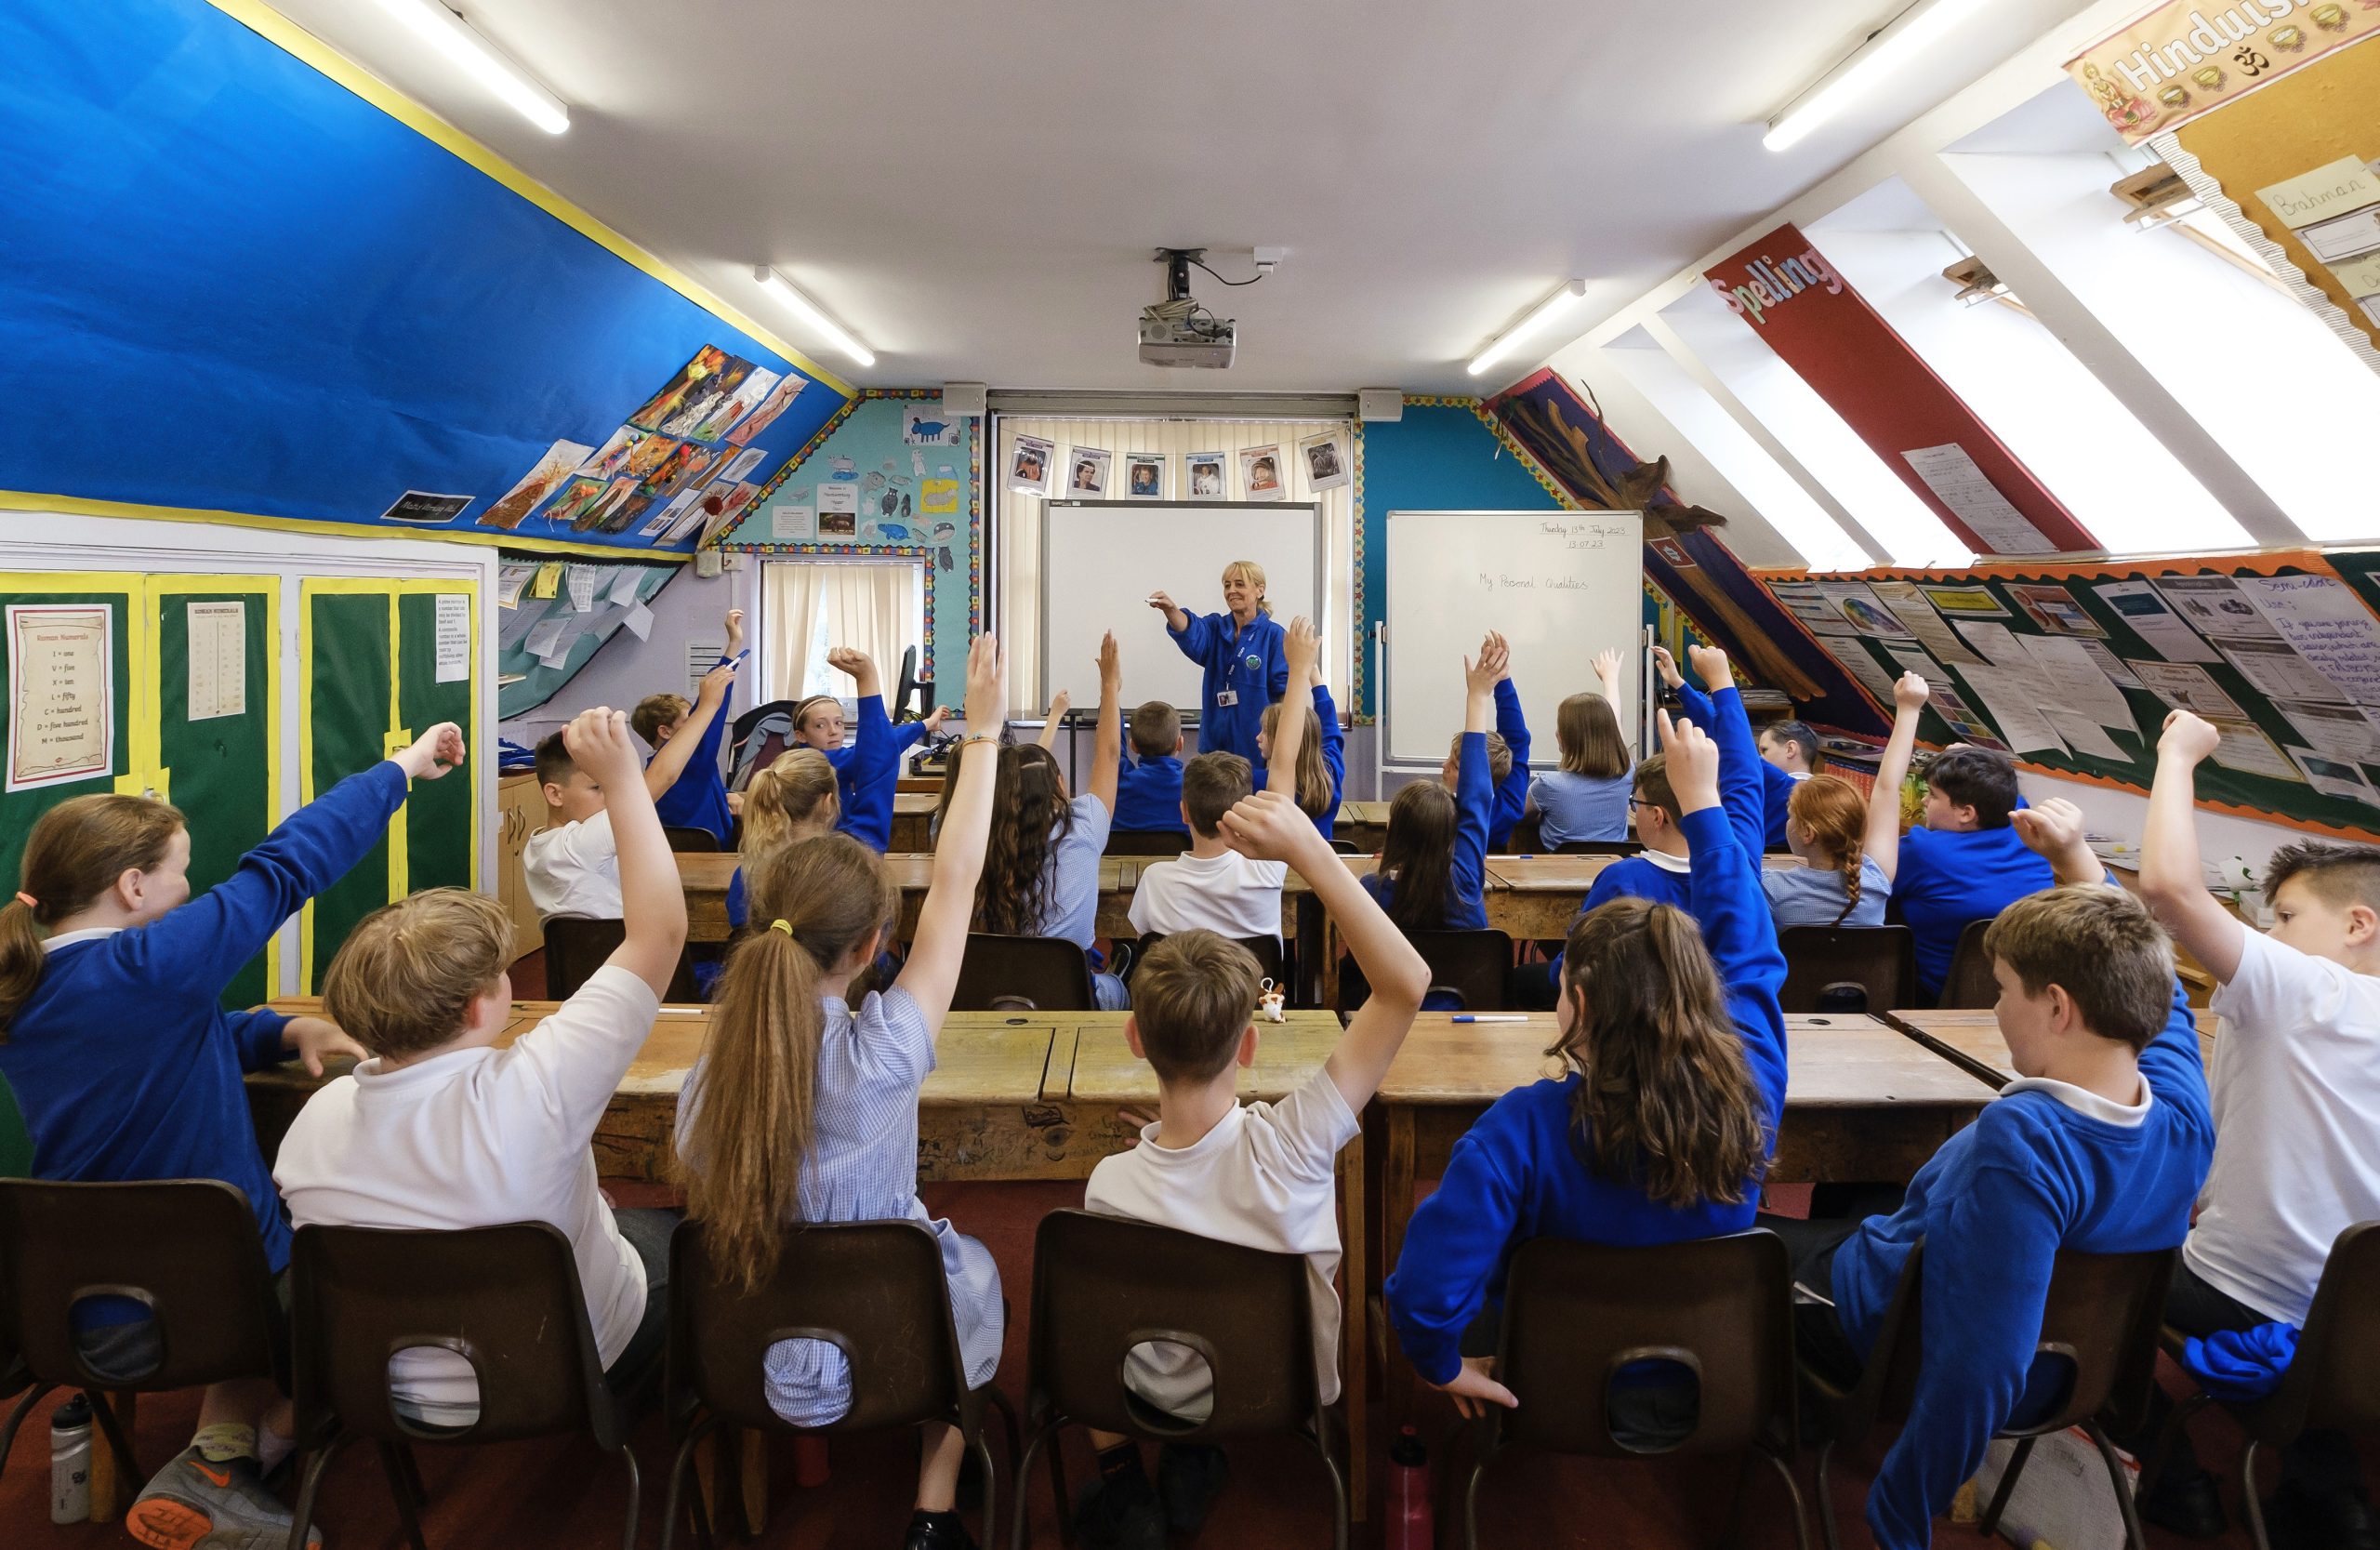 NEWS | ‘Warm And Welcoming’ atmosphere at local Primary School praised by Ofsted